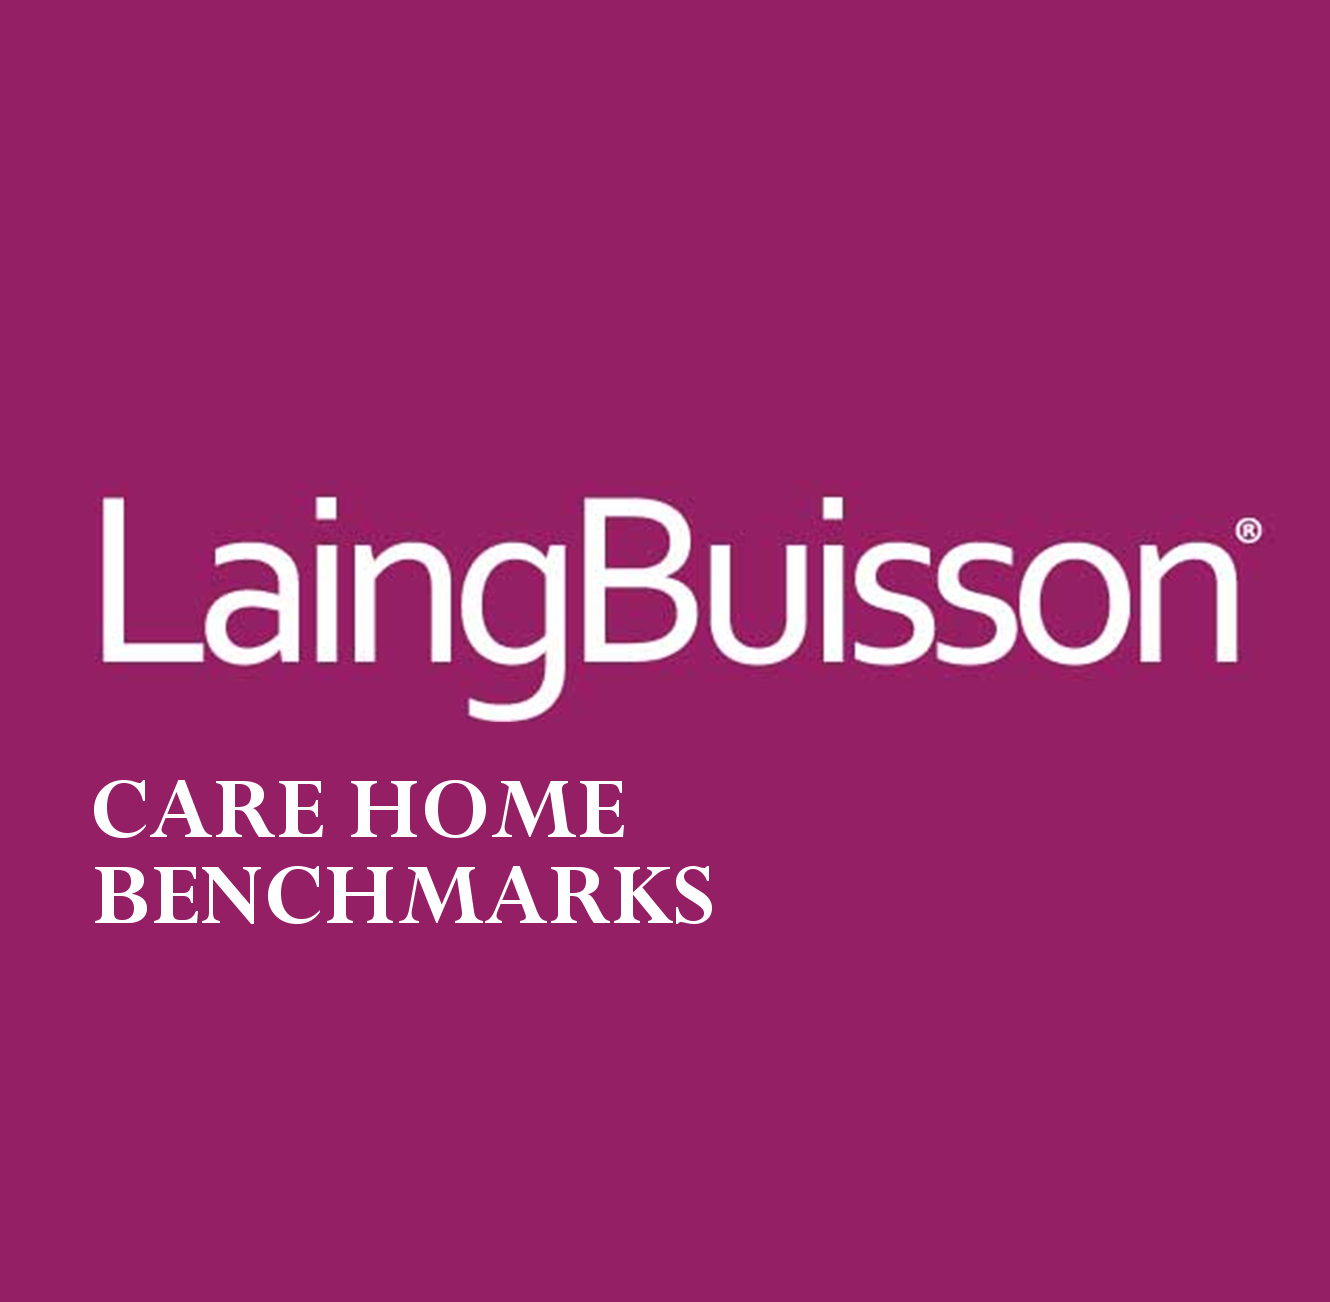 Care Home Benchmarking Webinar for Care England Members